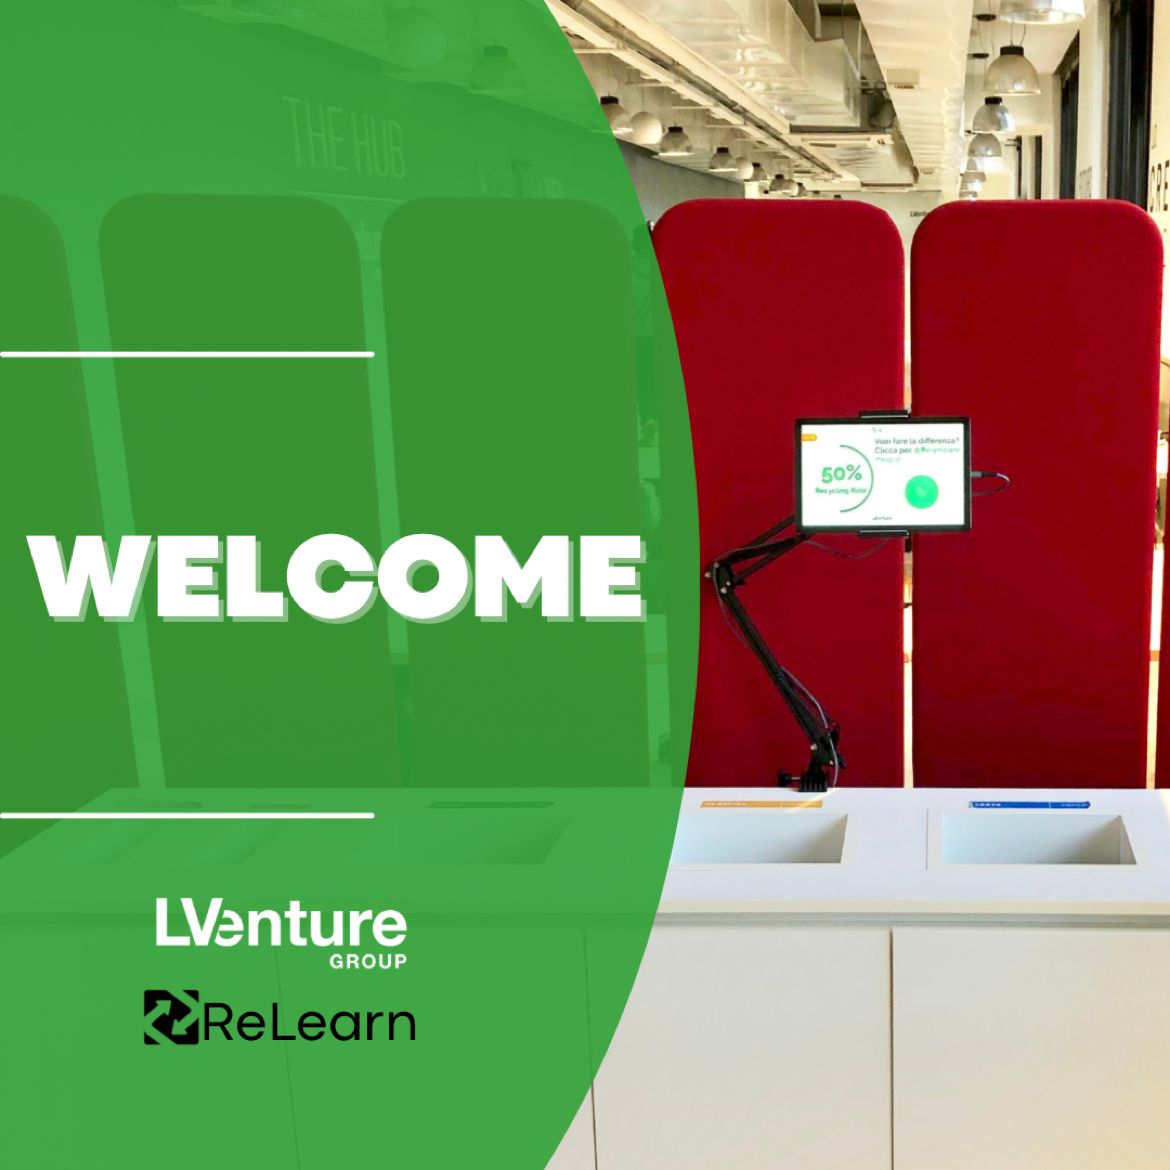 NANDO arrives at LVenture Group Headquarters in Rome